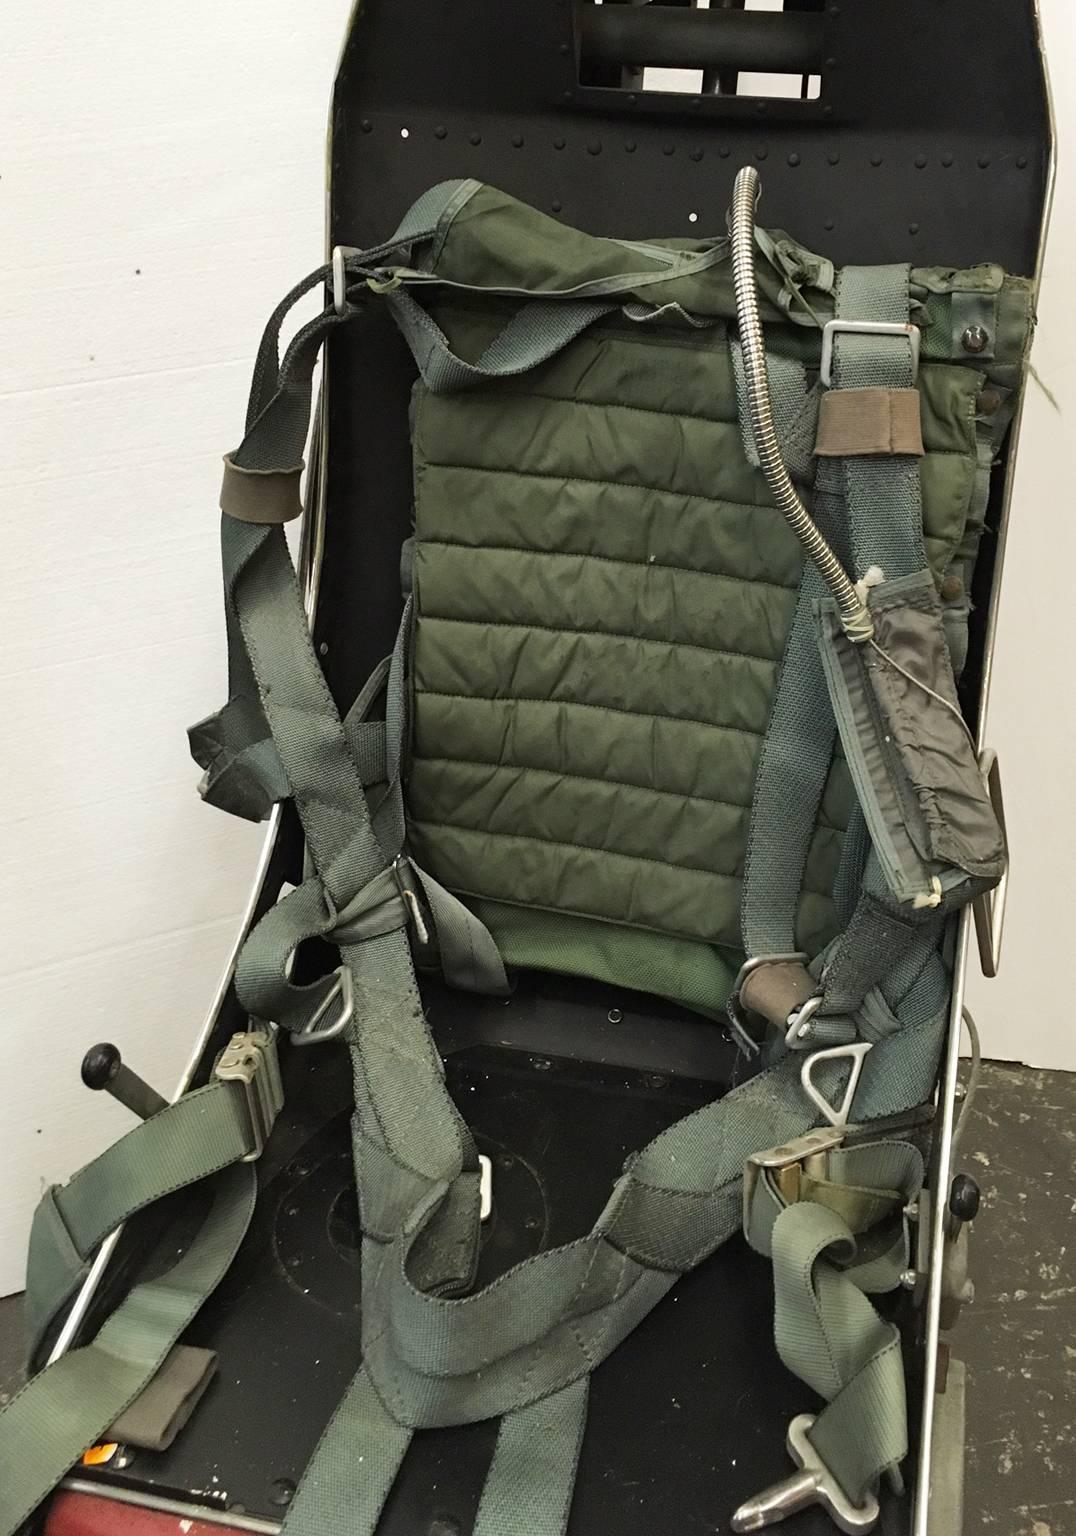 This is a pretty rare opportunity to have a polished F-16 ejection seat is an office chair. It is mounted on rolling casters and comes with everything except the parachute.